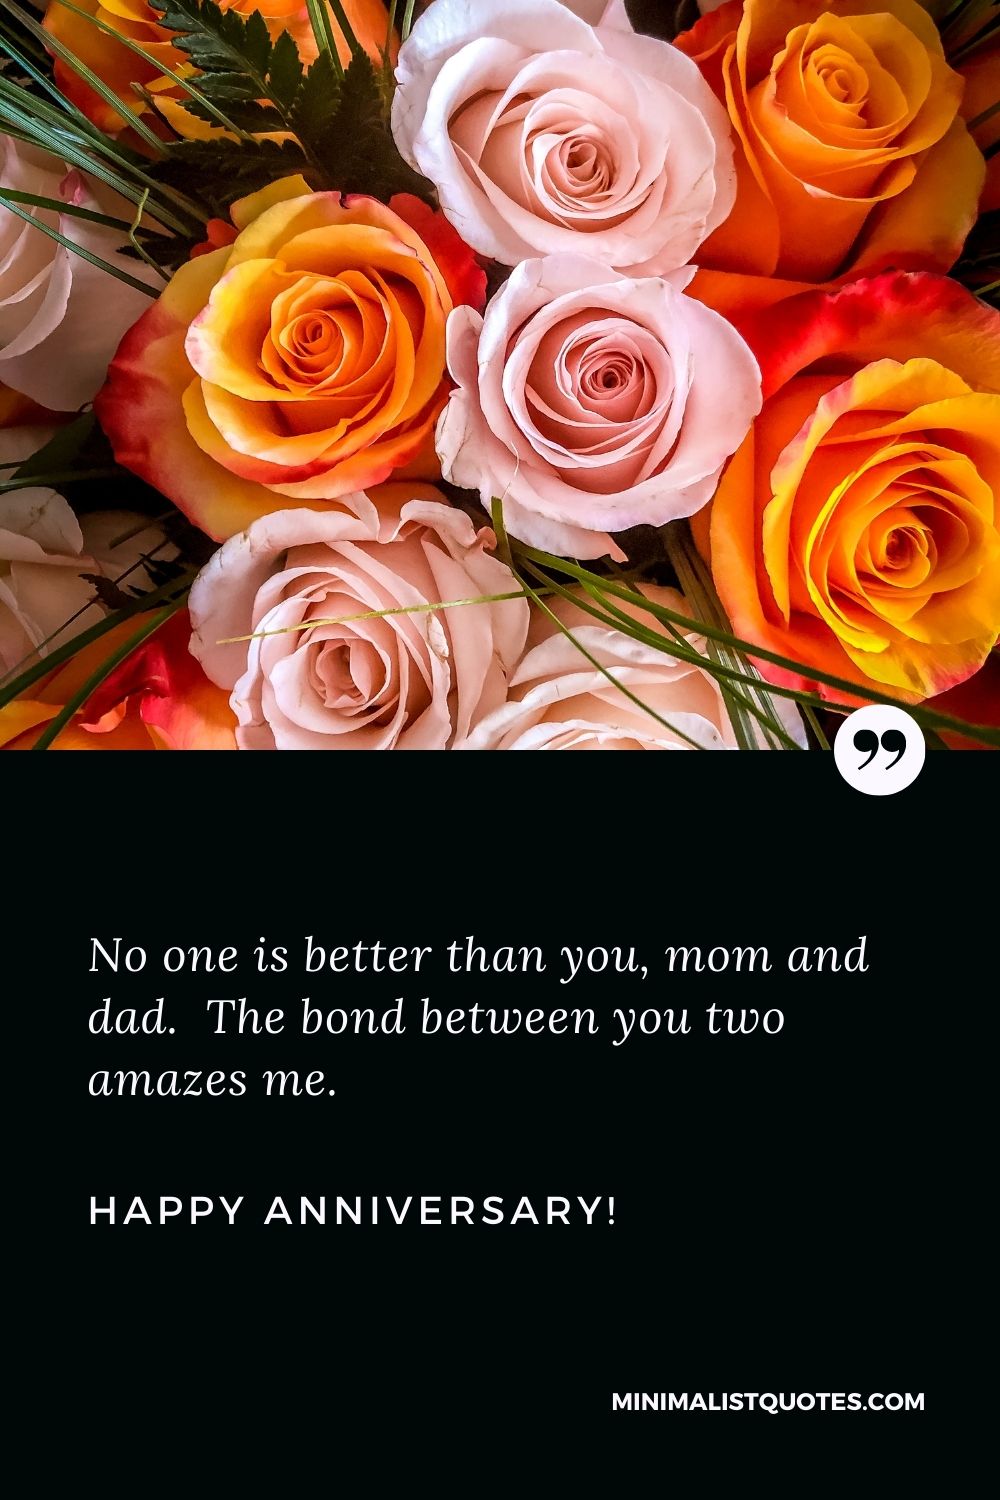 Wedding anniversary wishes for parents: No one is better than you, mom and dad. The bond between you two amazes me. Happy Anniversary!